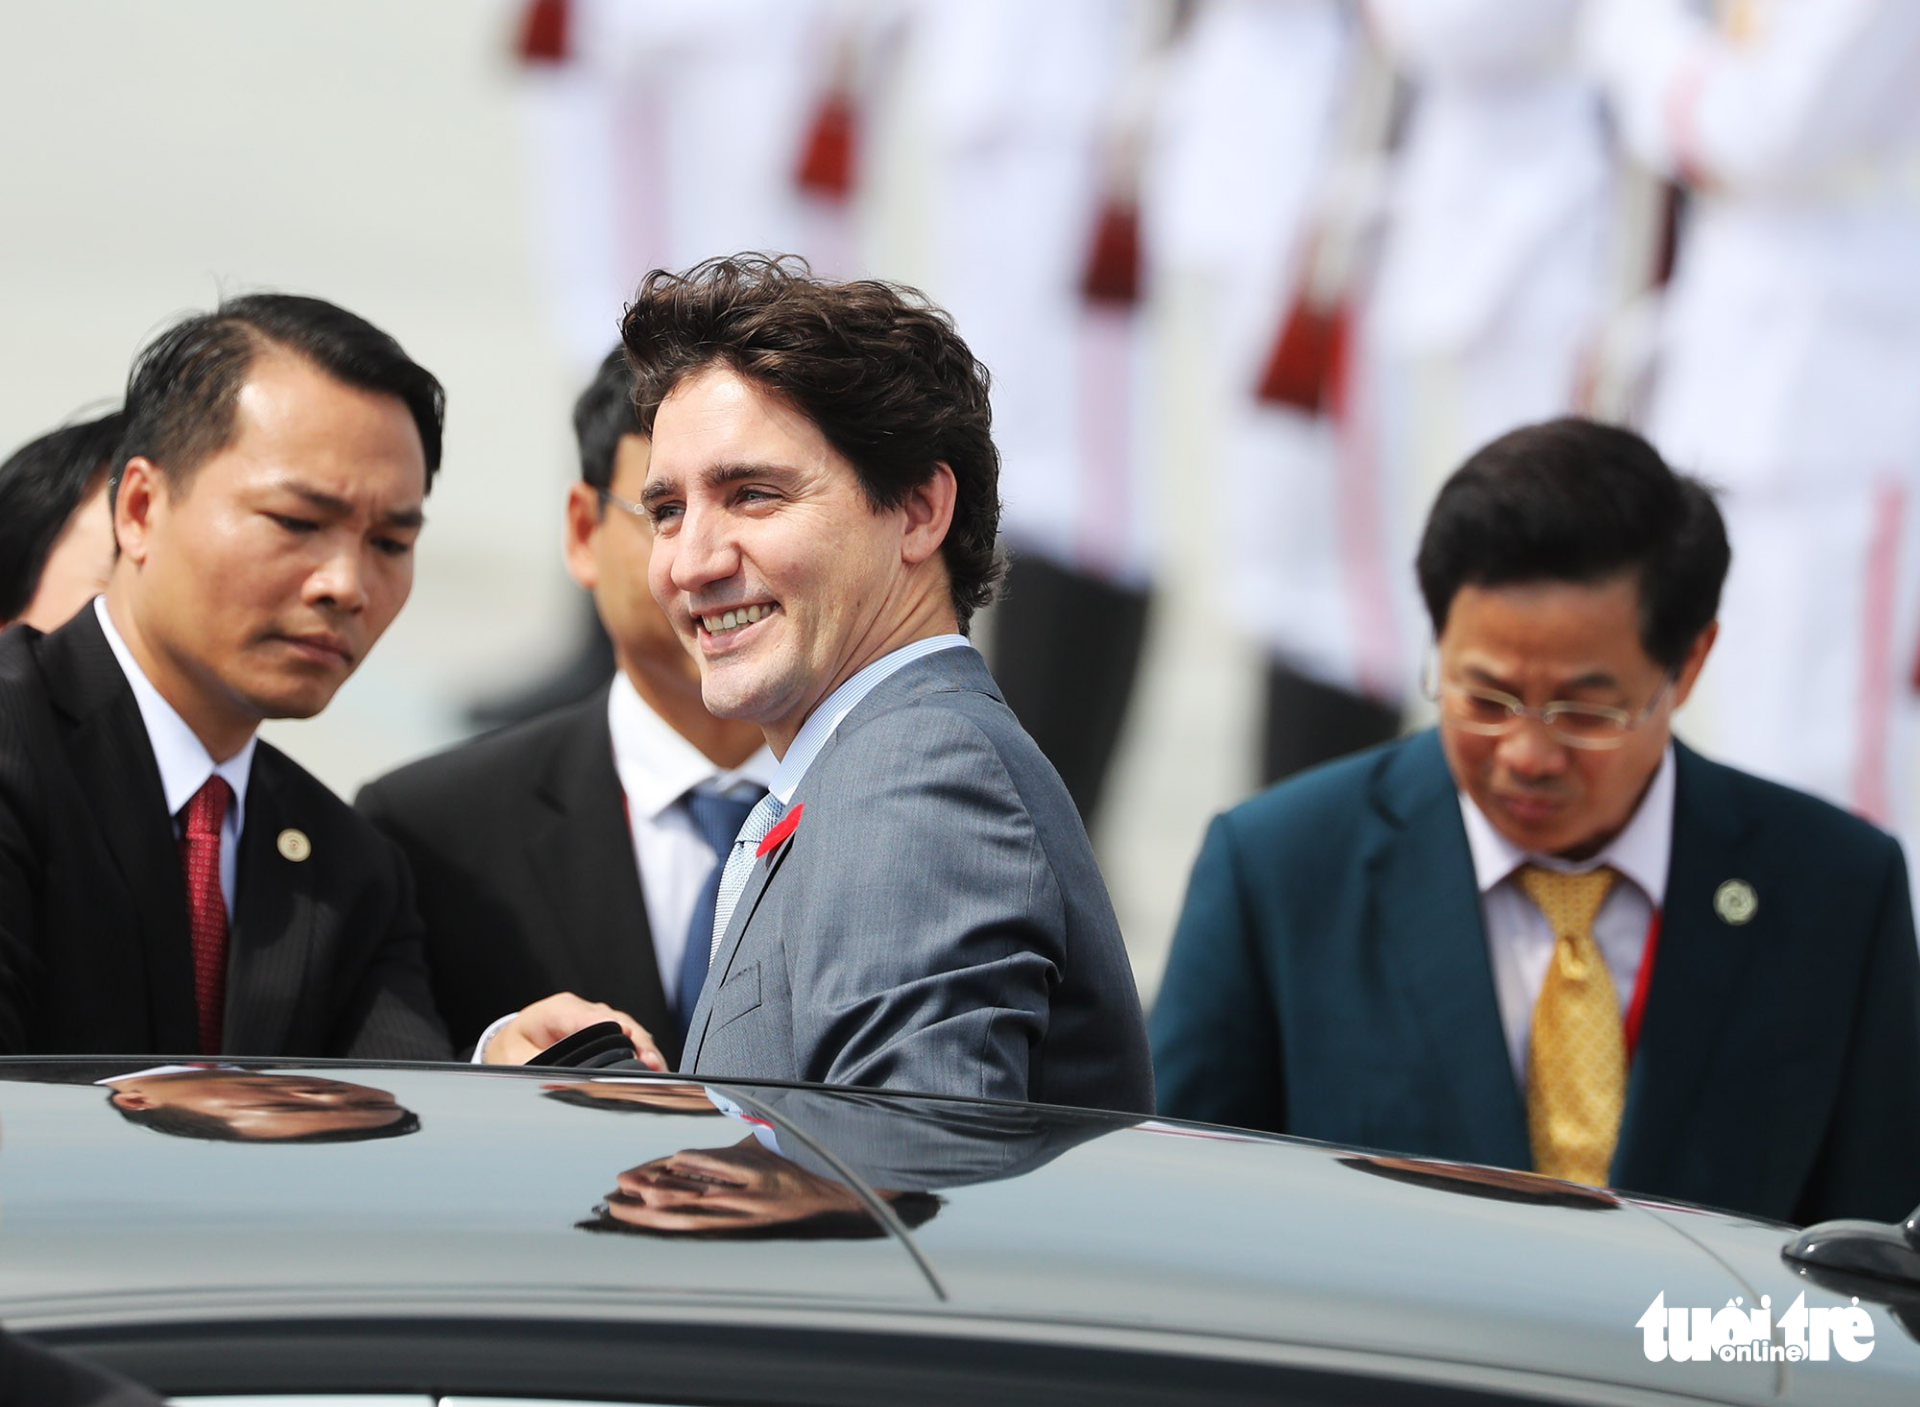 Canadian Prime Minister Justin Trudeau smiles as he gets into his car after landing in Da Nang, Vietnam for the APEC leaders' summit, November 10, 2017. Photo: Tuoi Tre